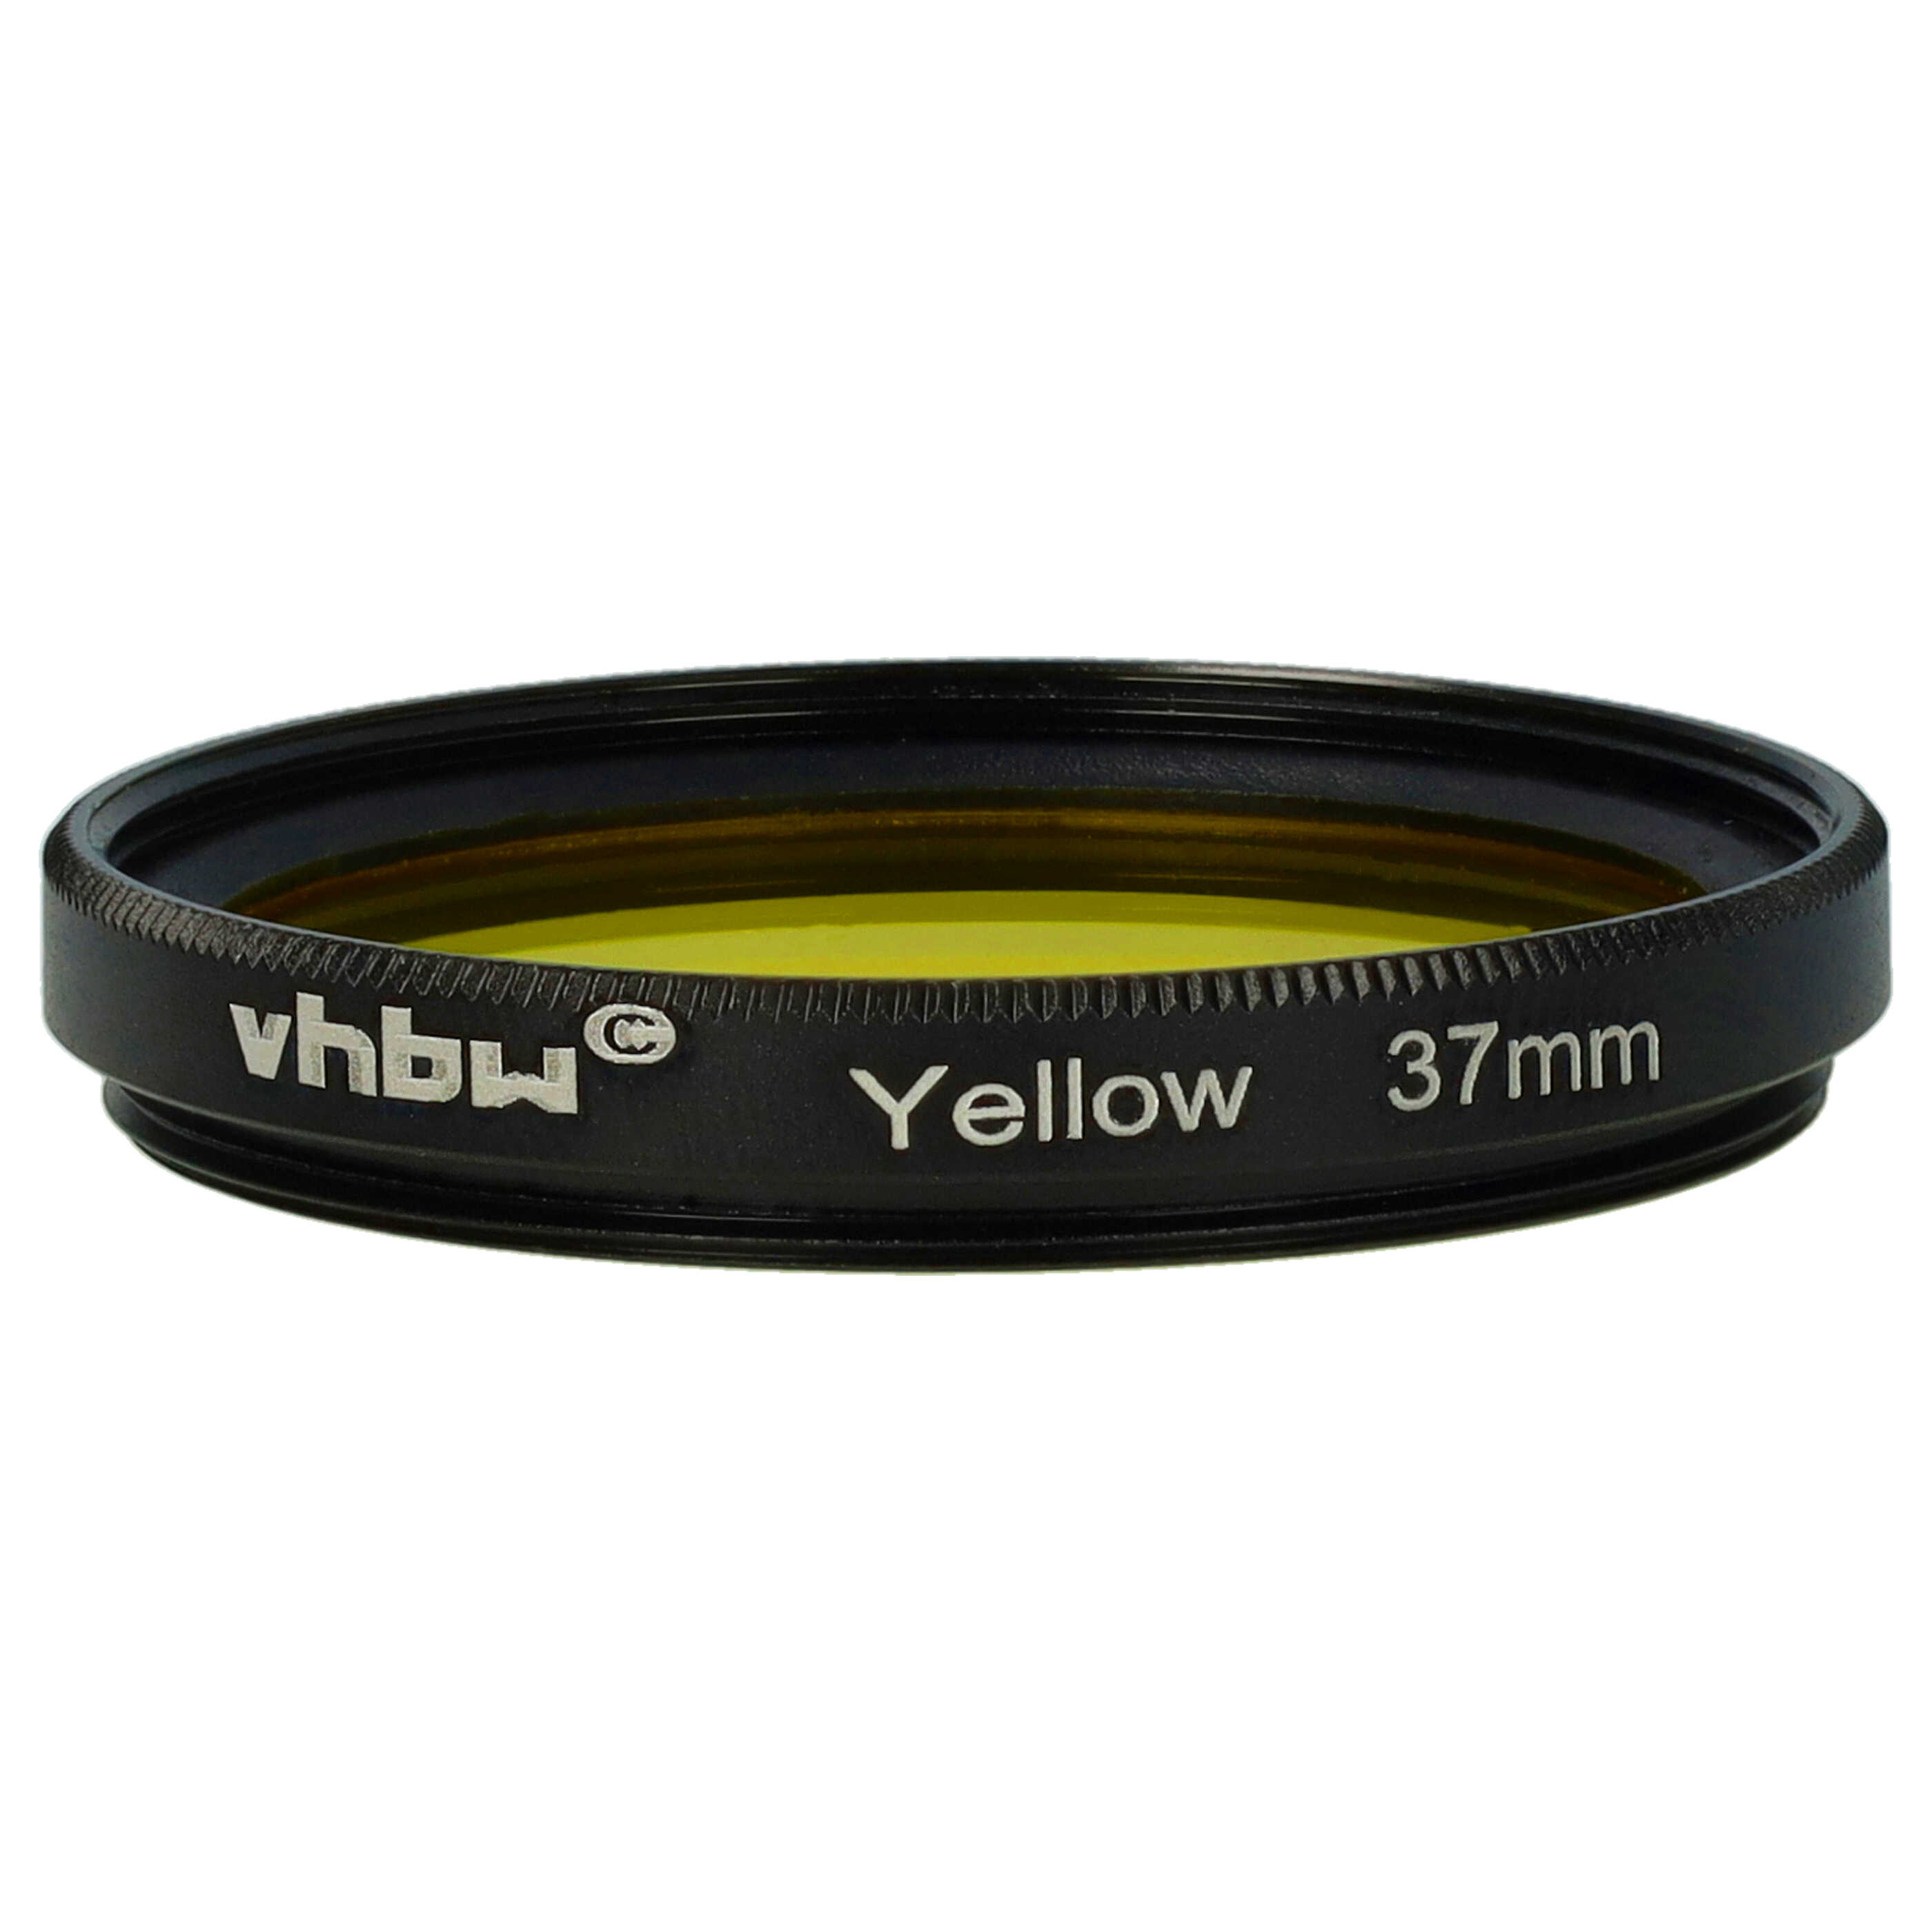 Coloured Filter, Yellow suitable for Camera Lenses with 37 mm Filter Thread - Yellow Filter